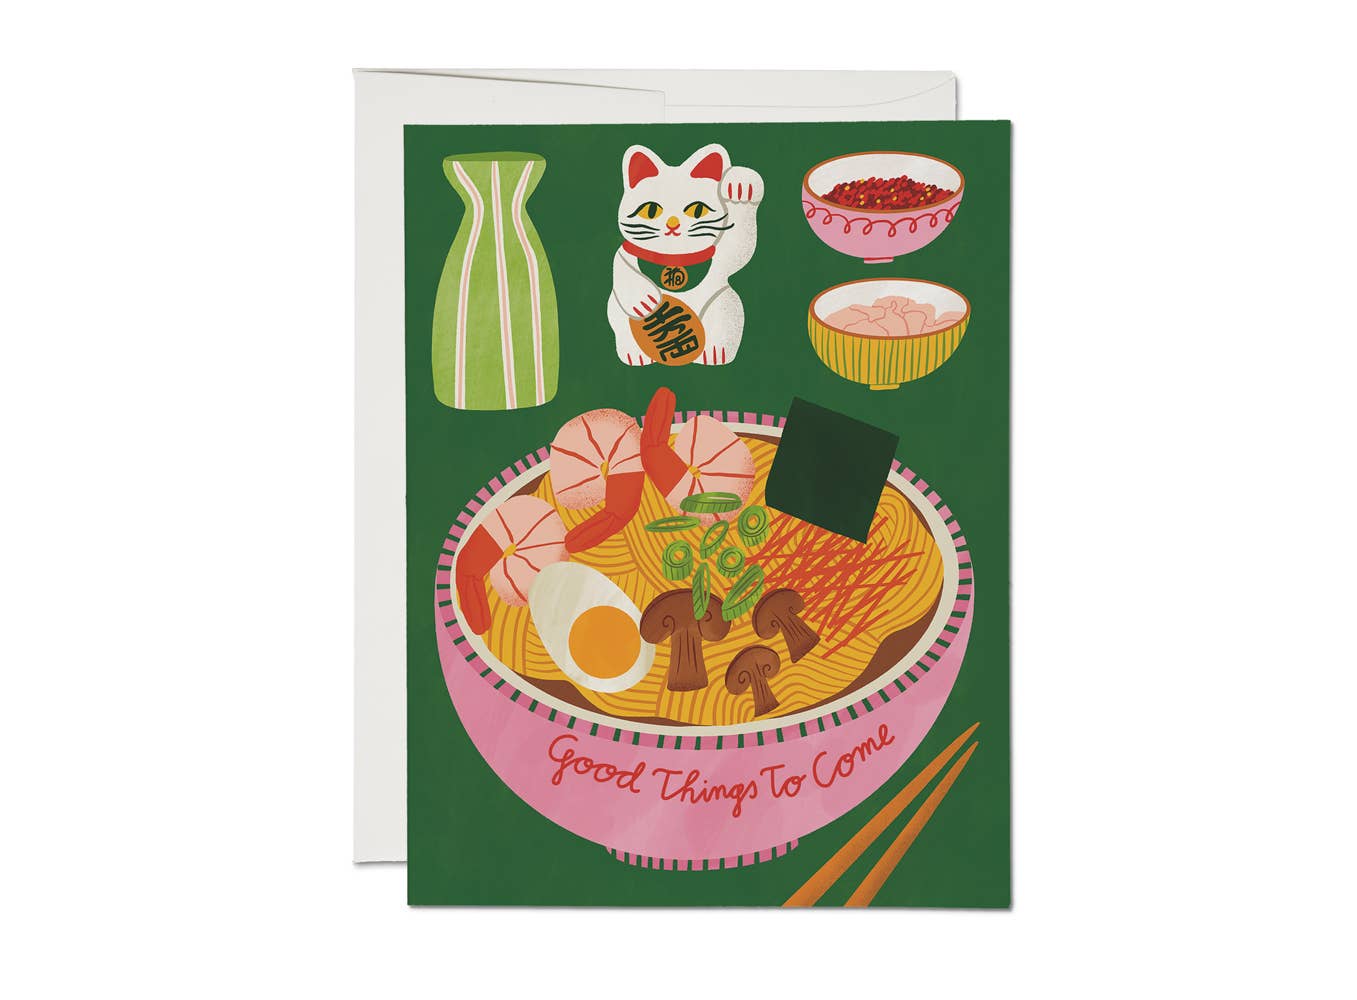 Ramen greeting card -- sake carafe, lucky cat, small bowl of spices and bowl of ramen that reads "Good Things To Come" 